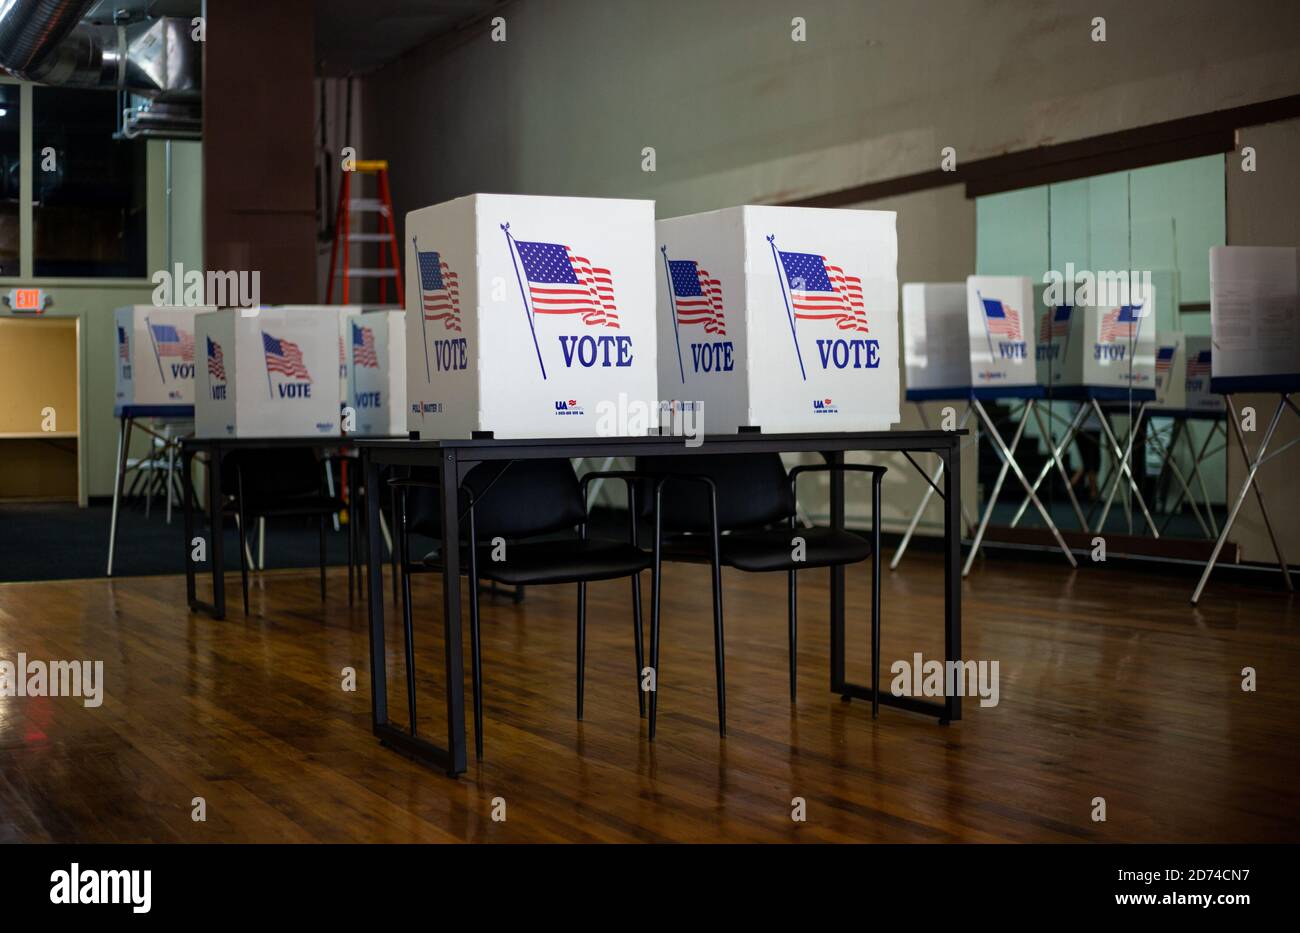 BROWNFIELD, TX - 10/09/2020 -  Voting booths at polling station during American elections. Stock Photo